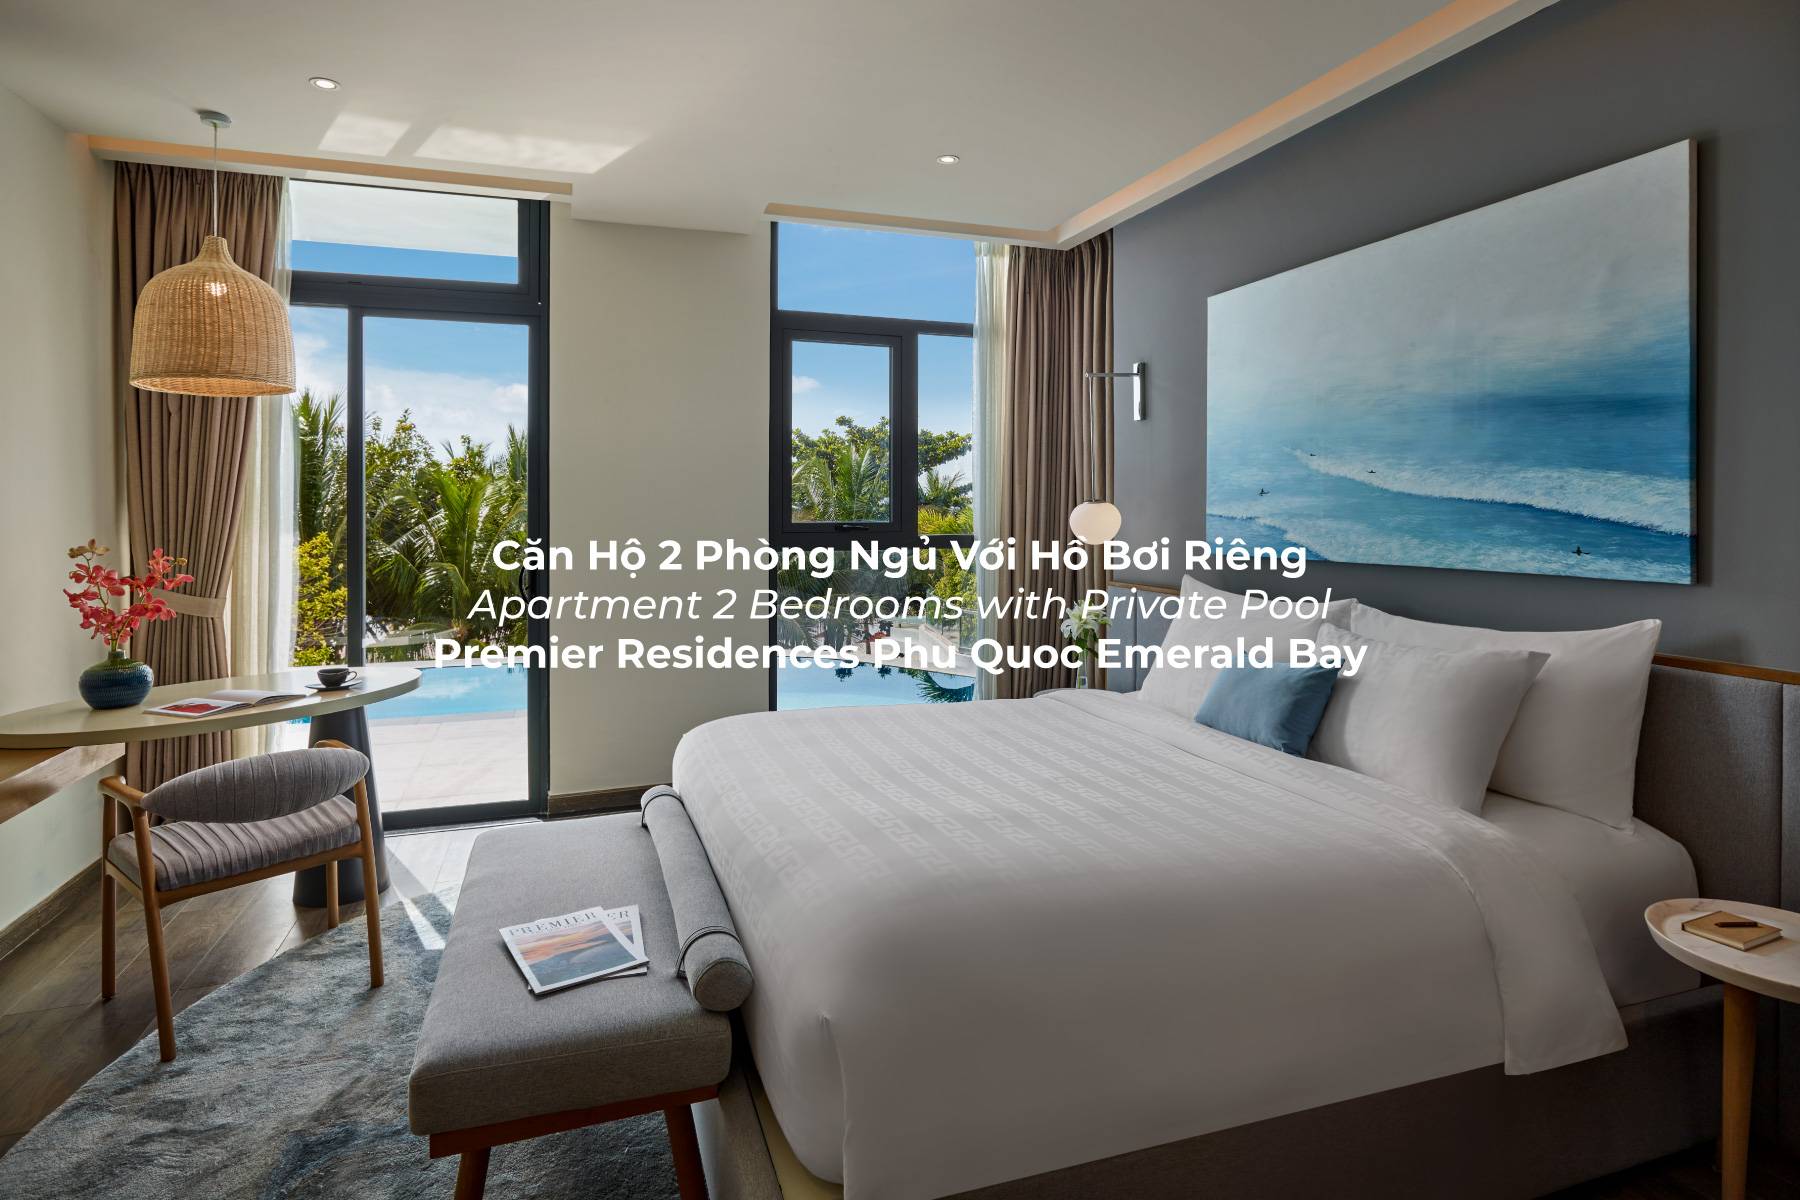 live-in-style-at-premier-residences-phu-quoc